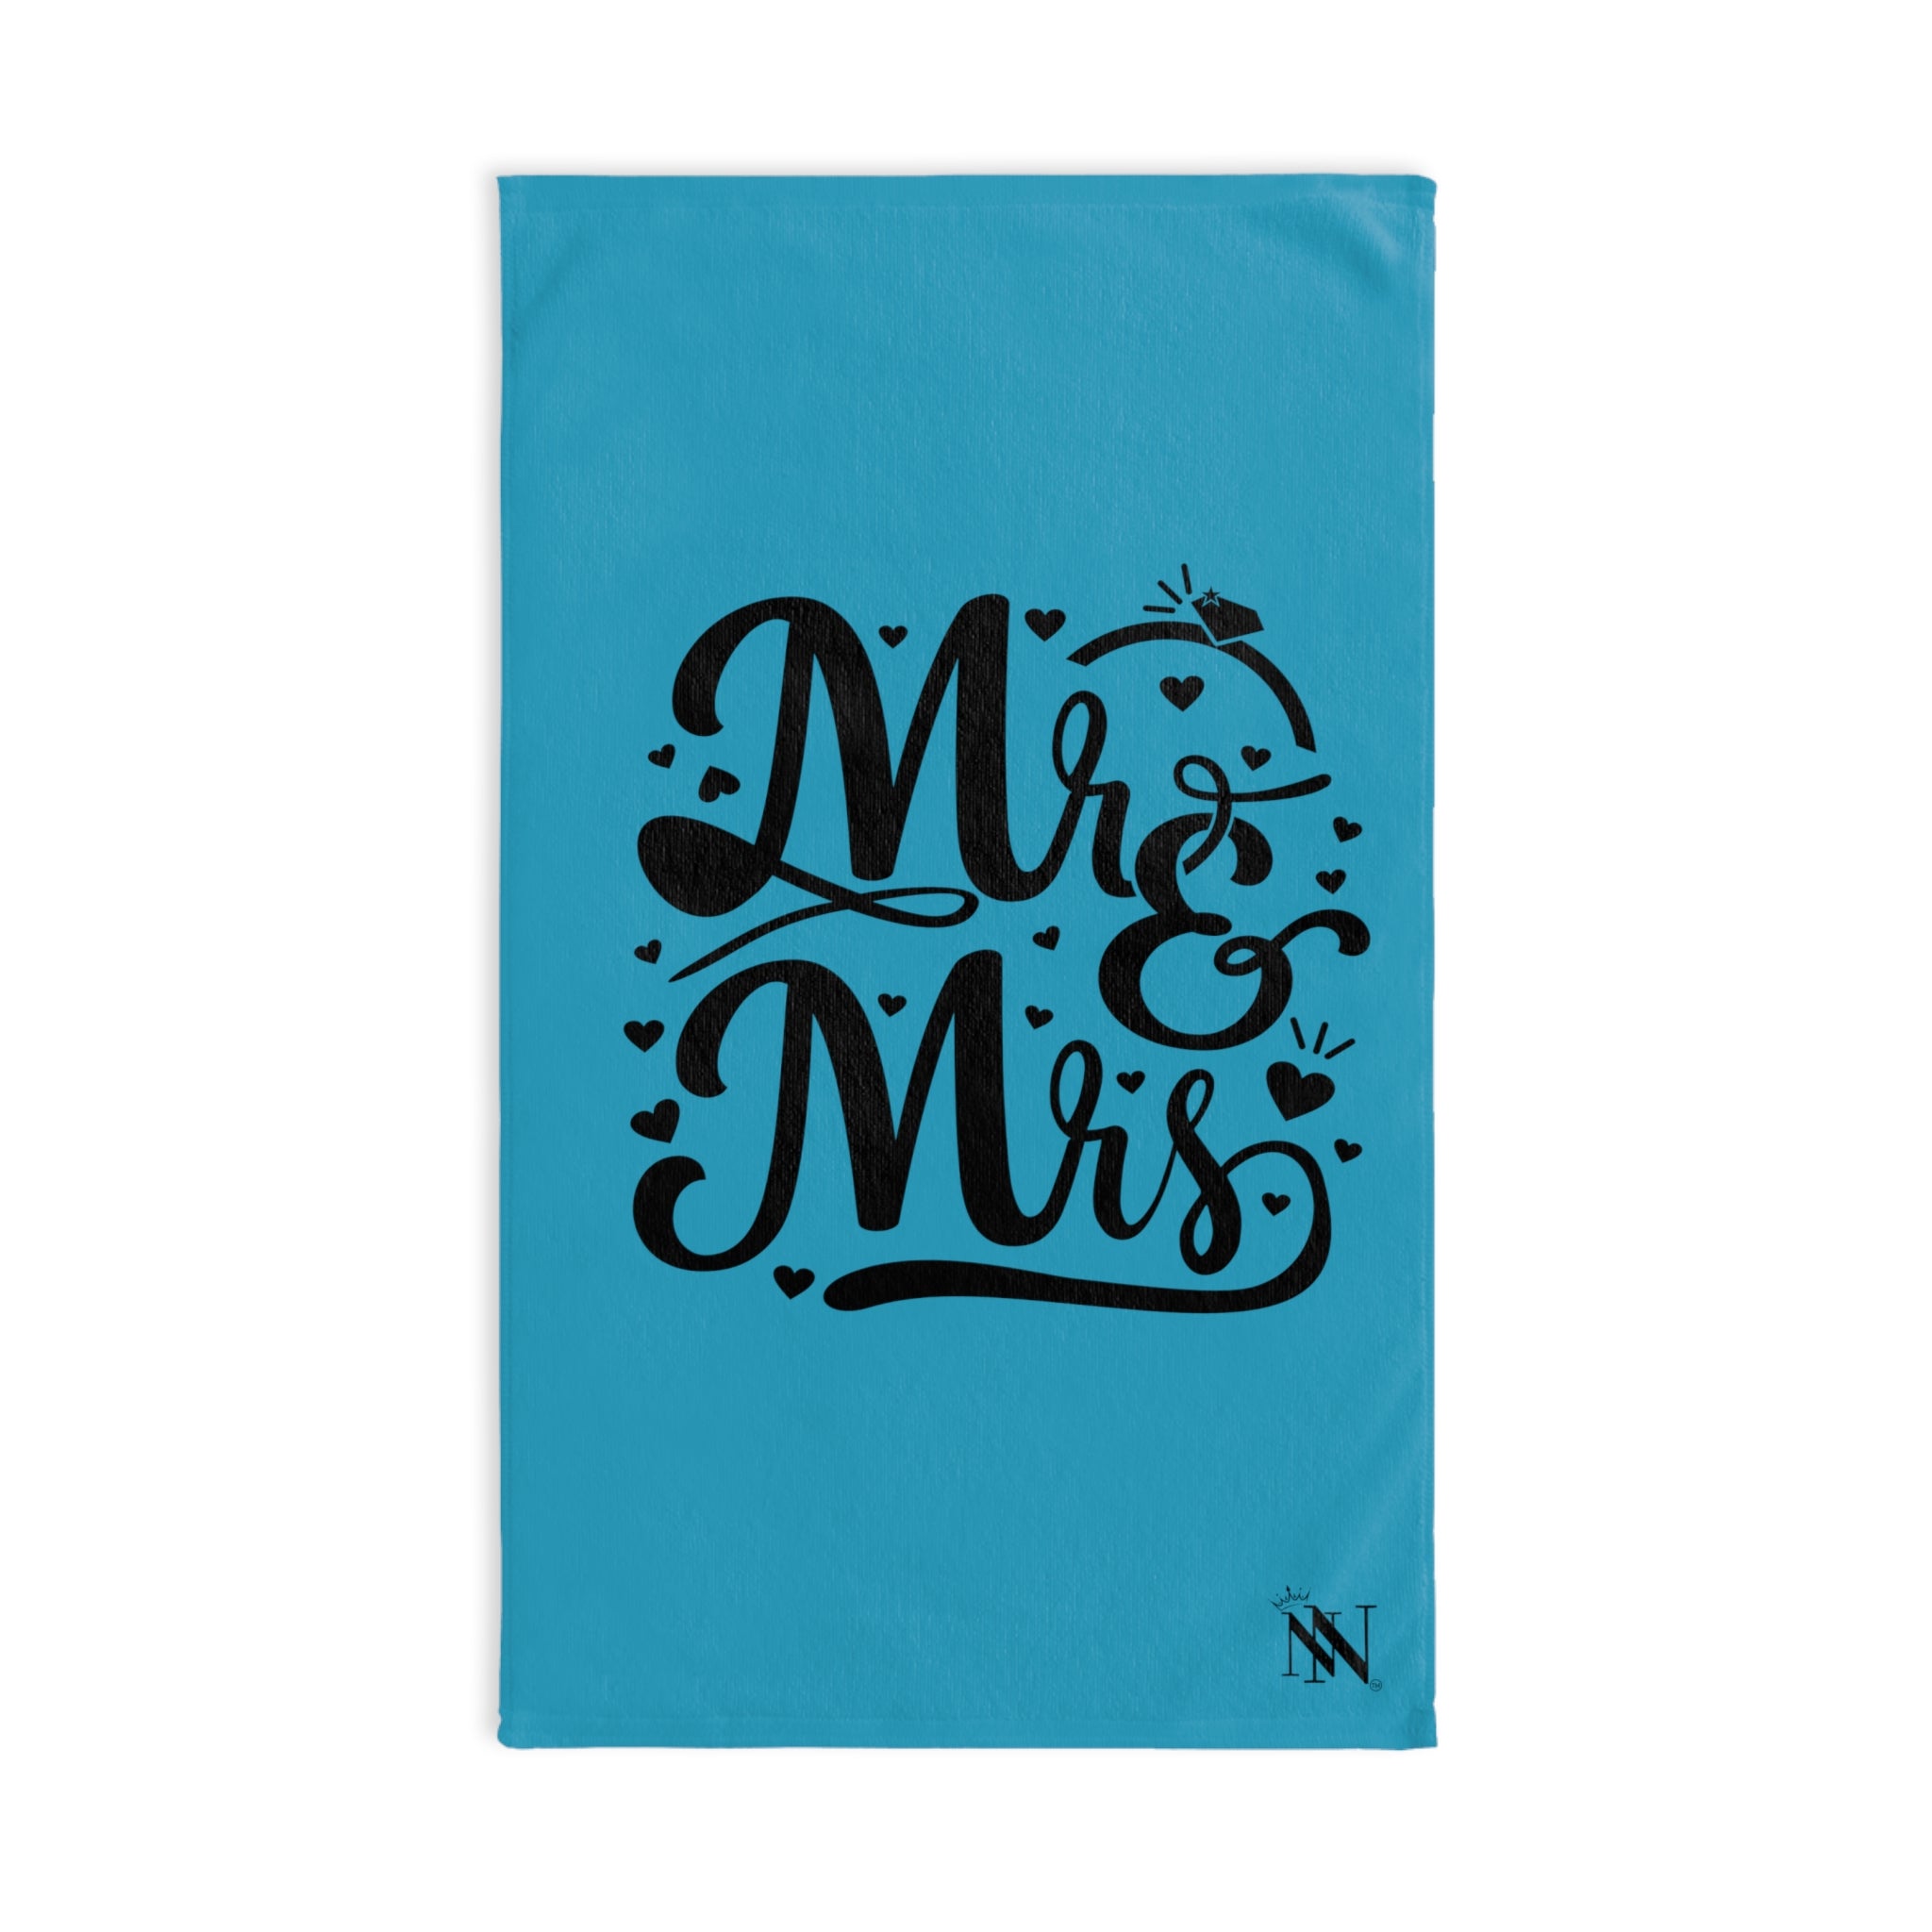 Mr Mrs Bride Teal | Novelty Gifts for Boyfriend, Funny Towel Romantic Gift for Wedding Couple Fiance First Year Anniversary Valentines, Party Gag Gifts, Joke Humor Cloth for Husband Men BF NECTAR NAPKINS